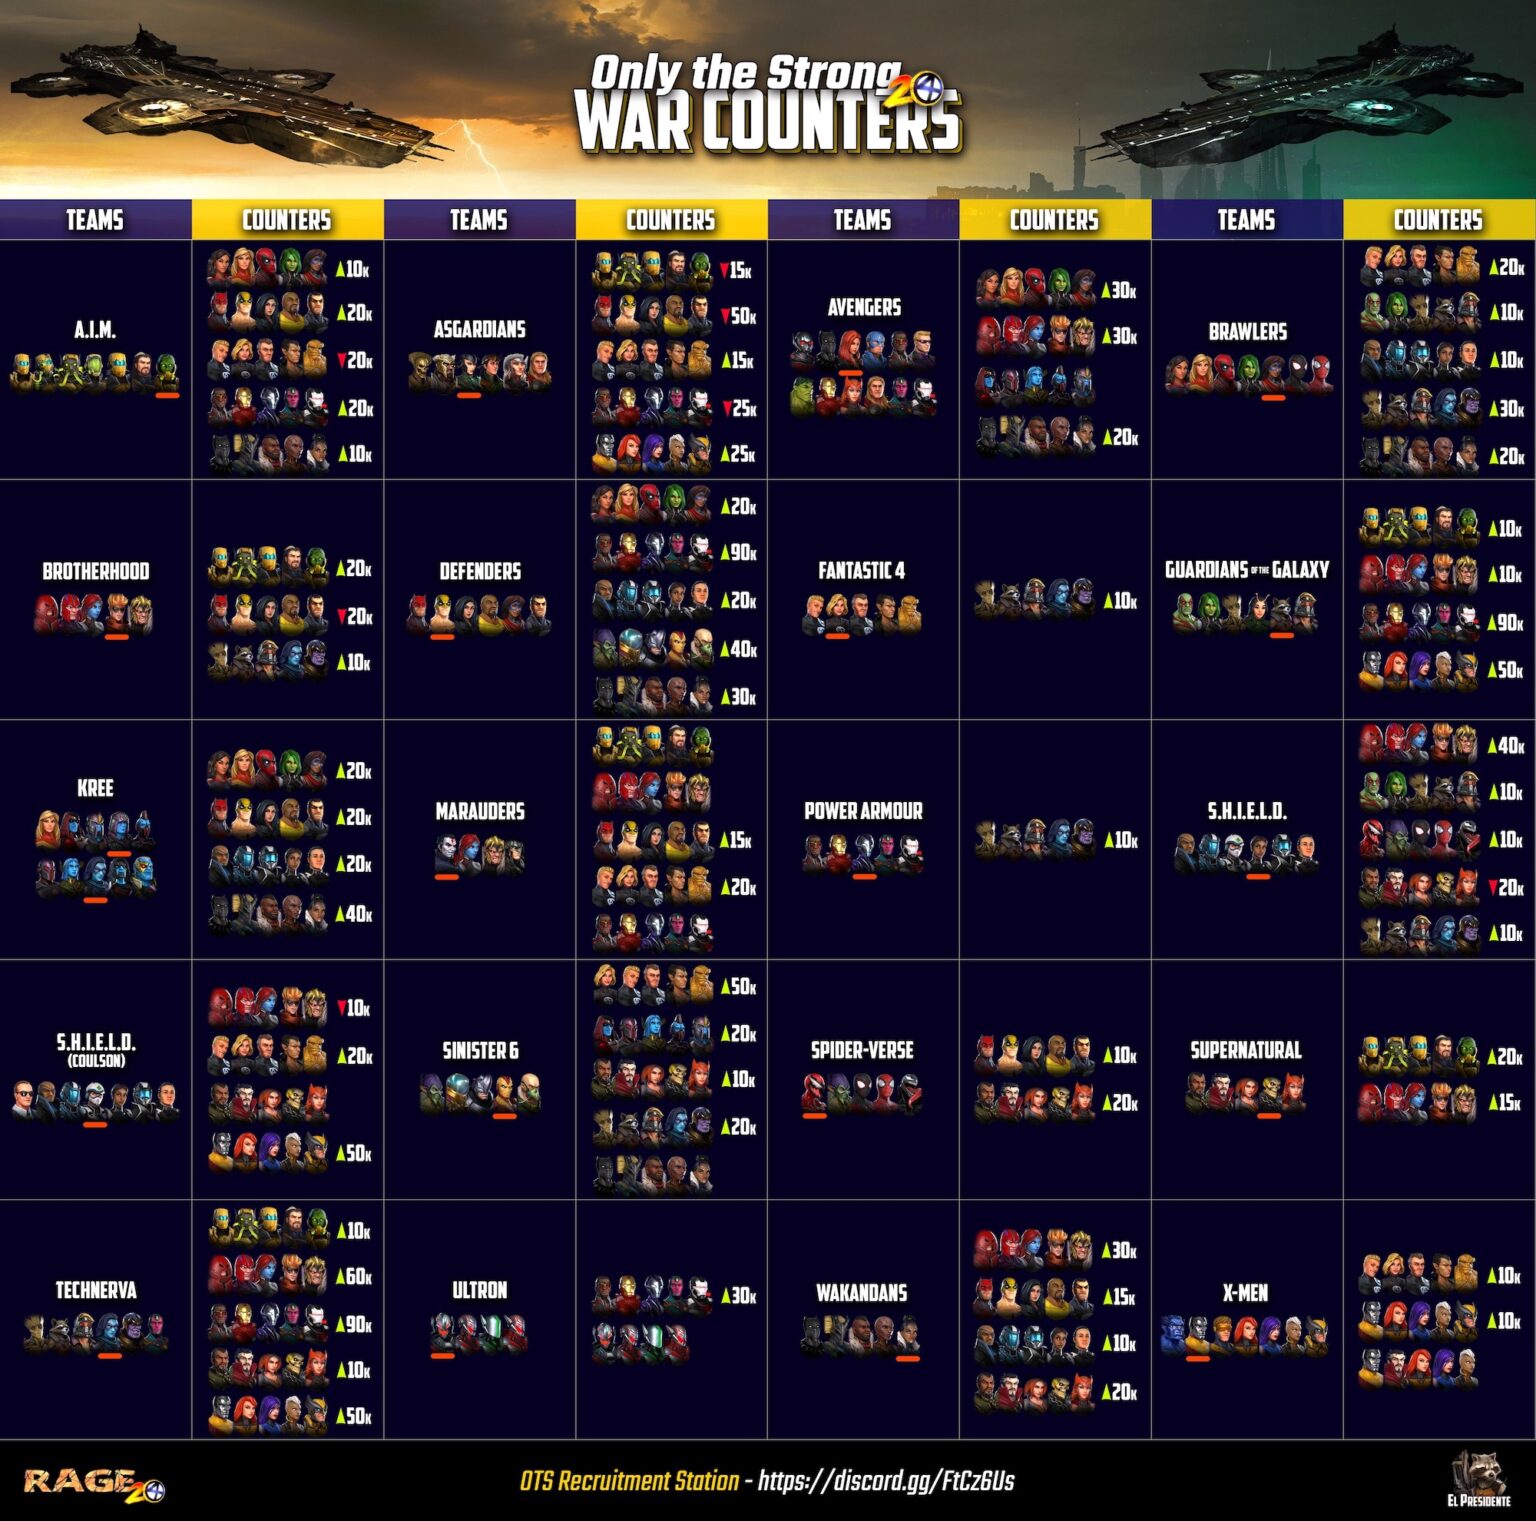 Is this the most recent and 'best' war counters chart? r/MarvelStrikeForce